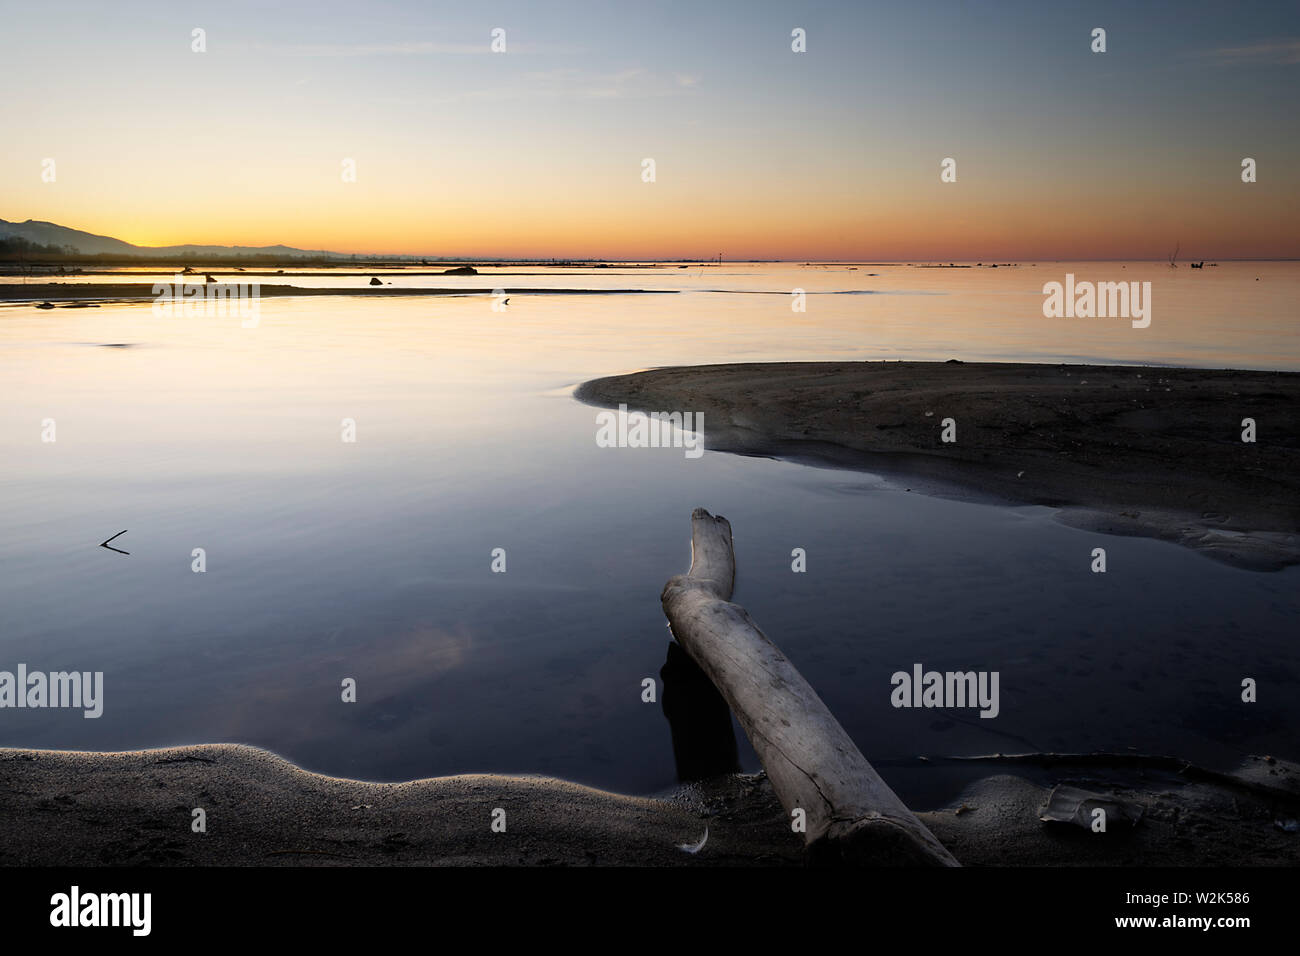 lake at sunset with sand and wood in the foreground Stock Photo